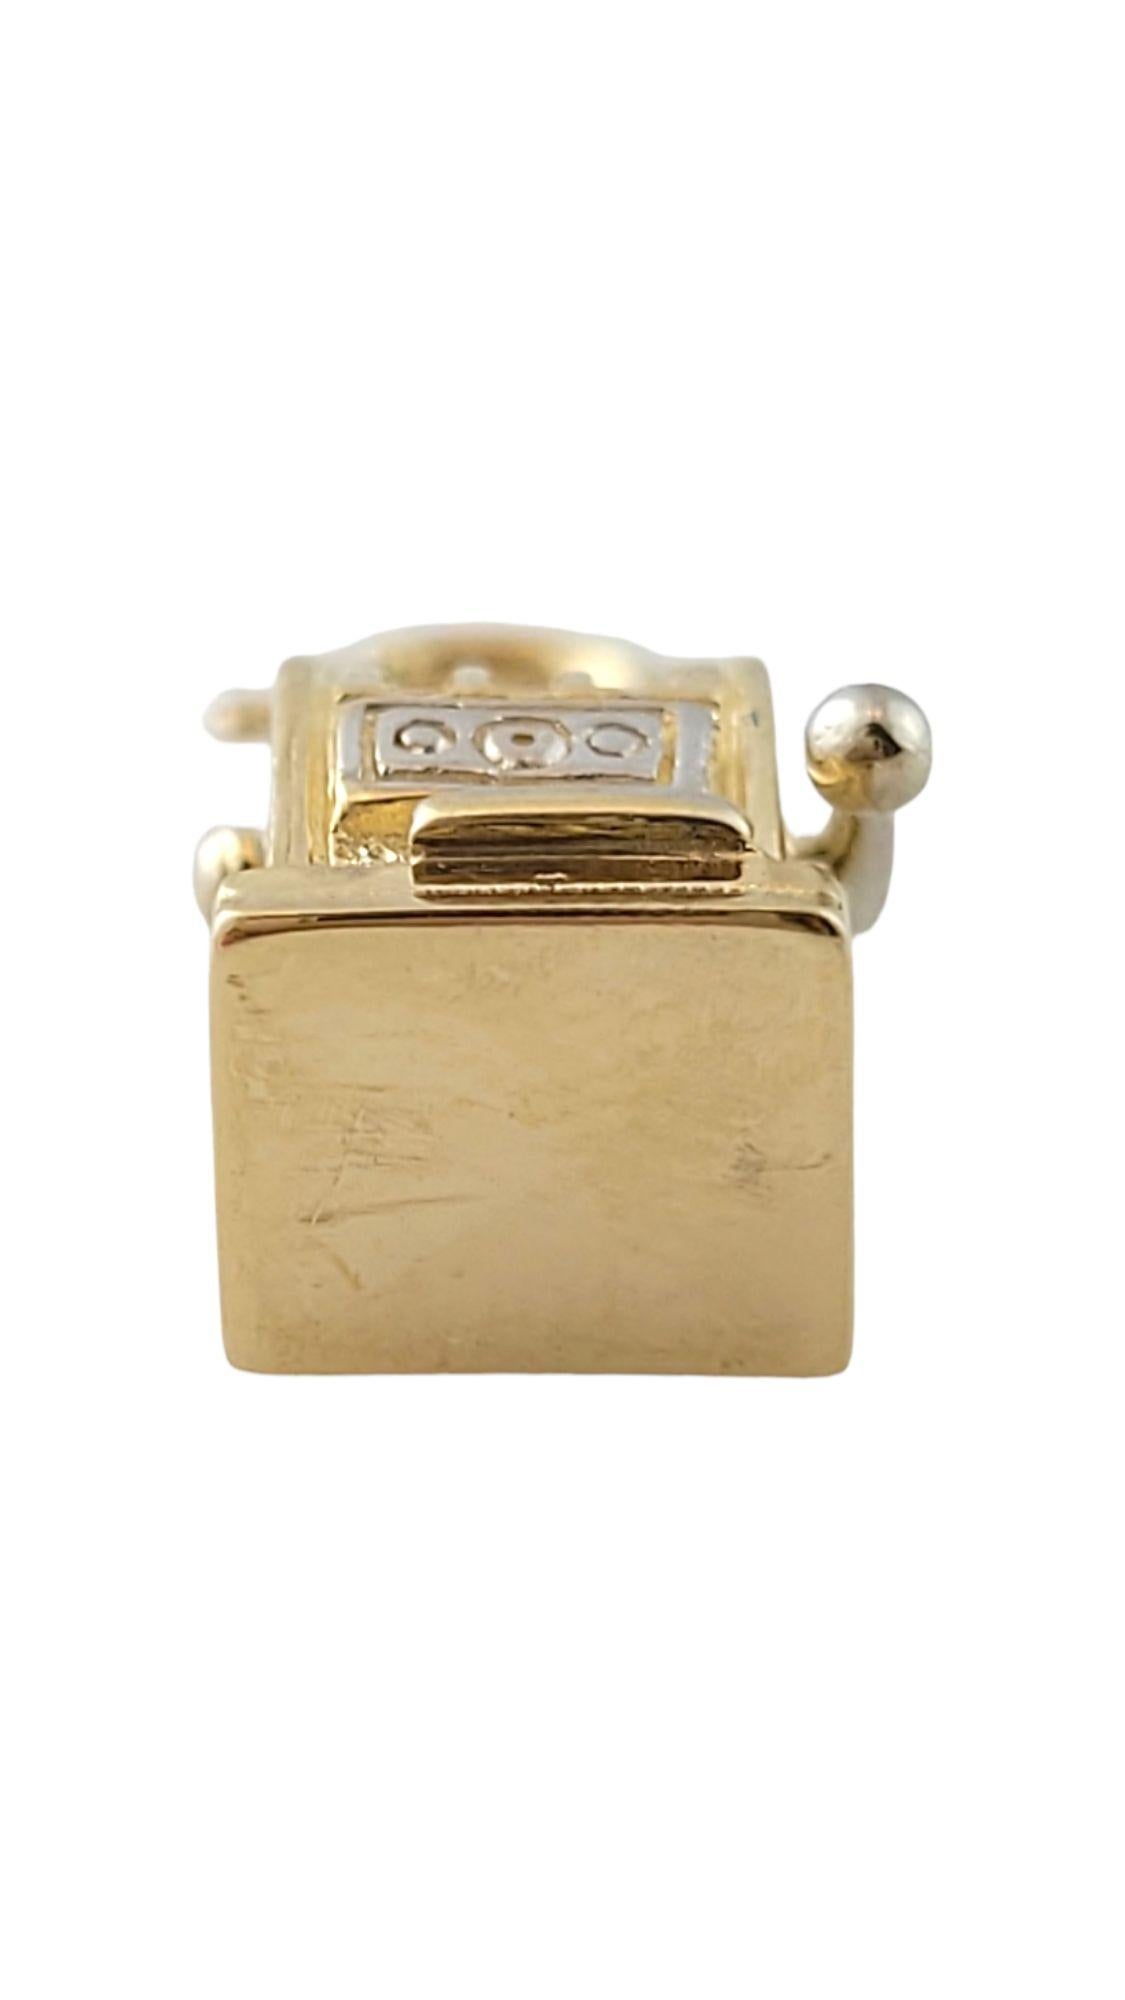 14K Yellow Gold Slot Machine Charm #14435 In Good Condition For Sale In Washington Depot, CT